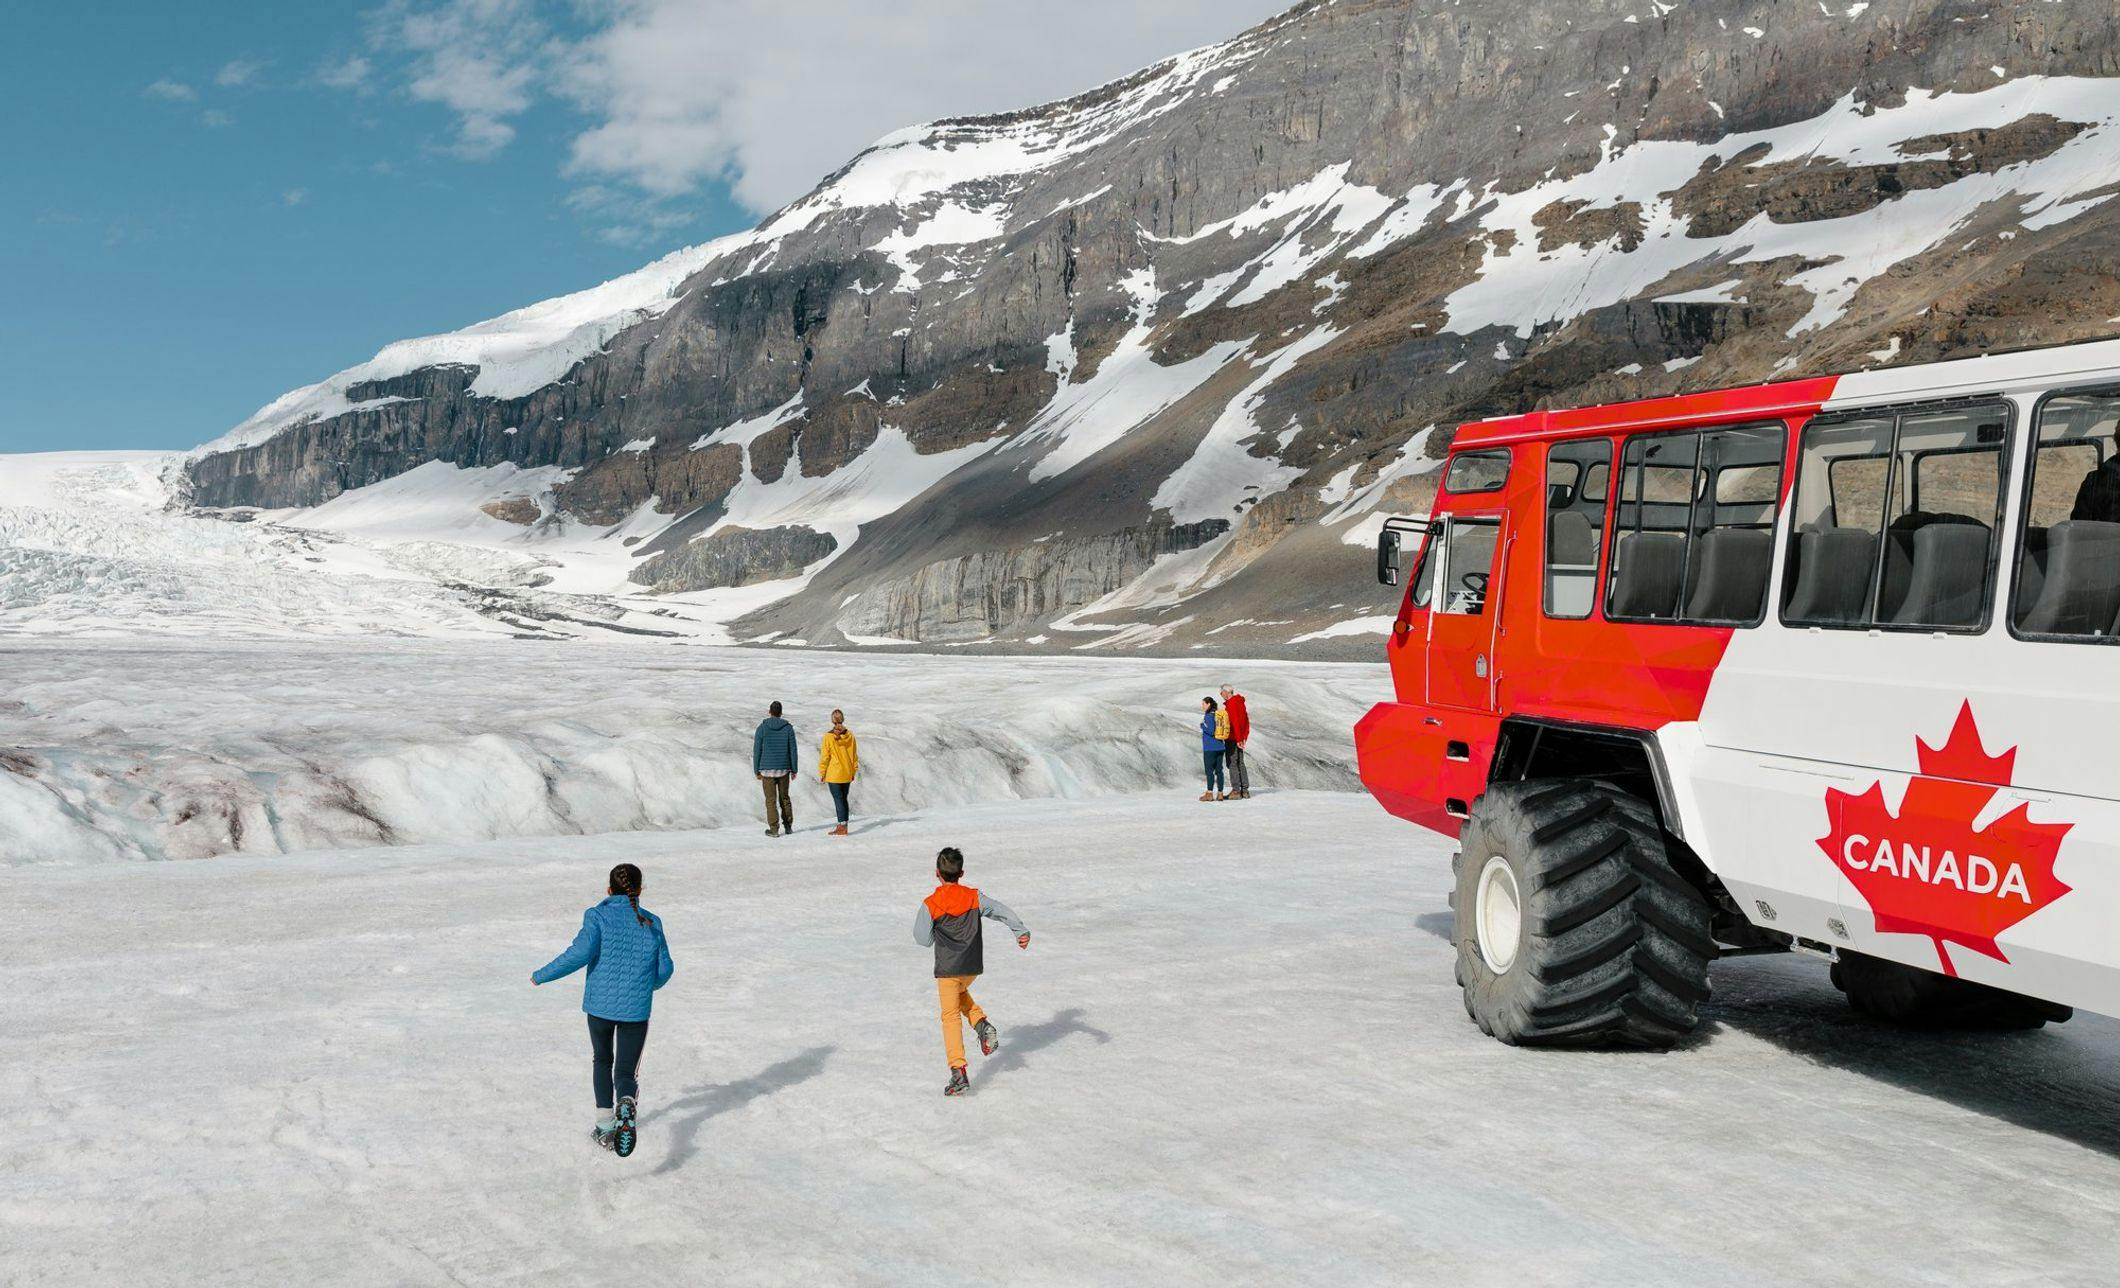 A family walks on the Athabasca Glacier after taking the Ice Explorer bus pictured on the right to reach it at the Columbia Icefield near Banff National Park.